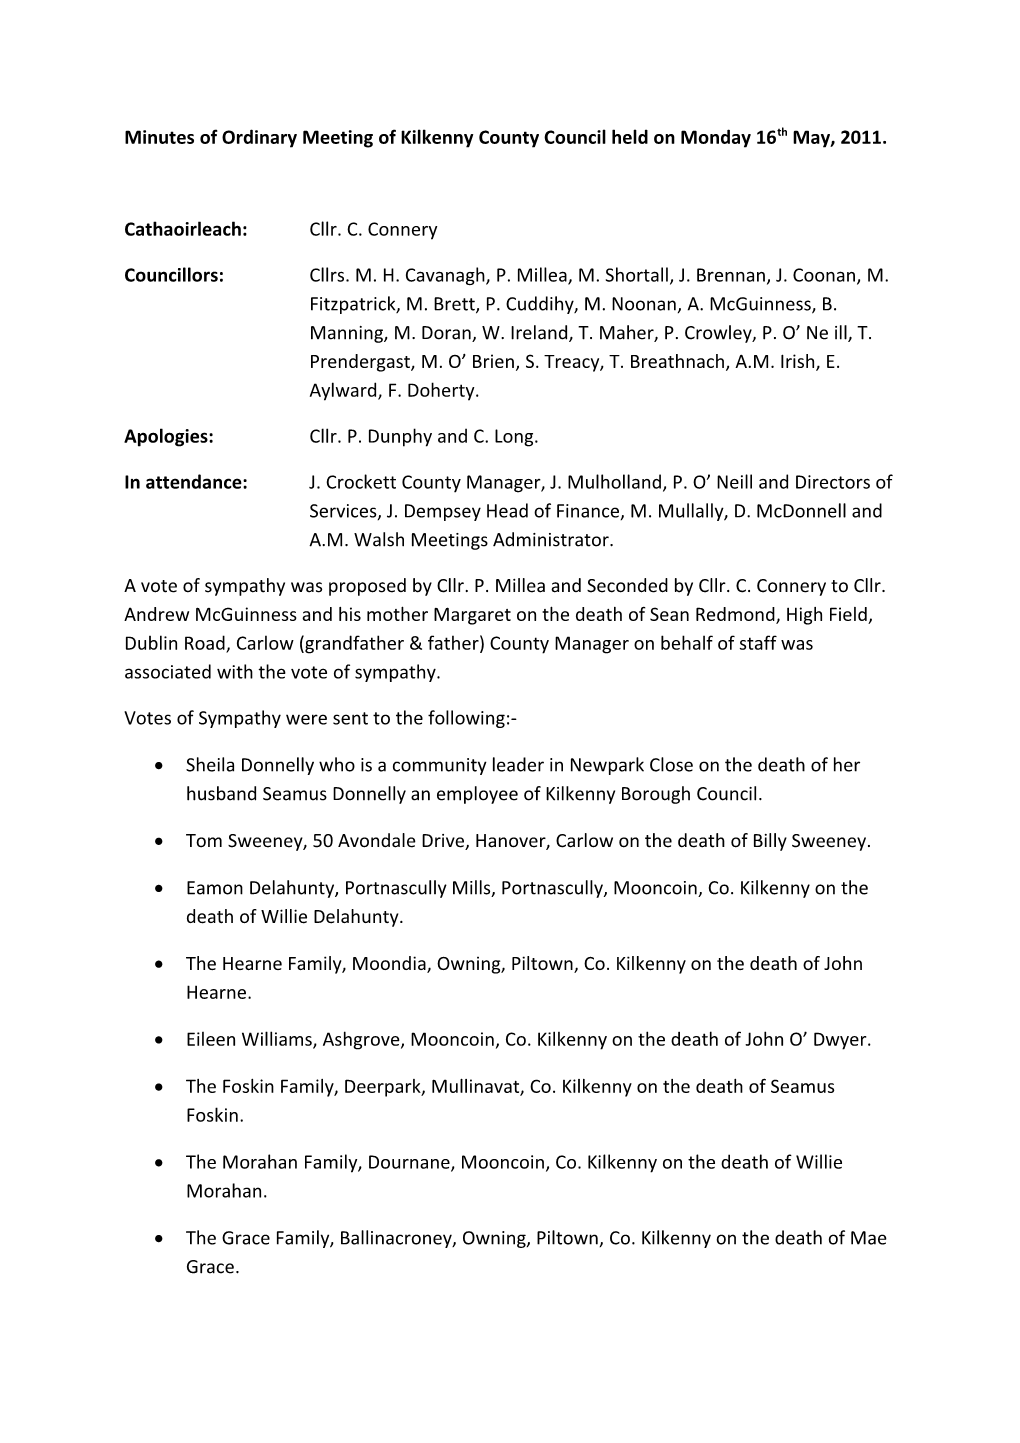 Minutes of Ordinary Meeting of Kilkenny County Council Held on Monday 16Th May, 2011